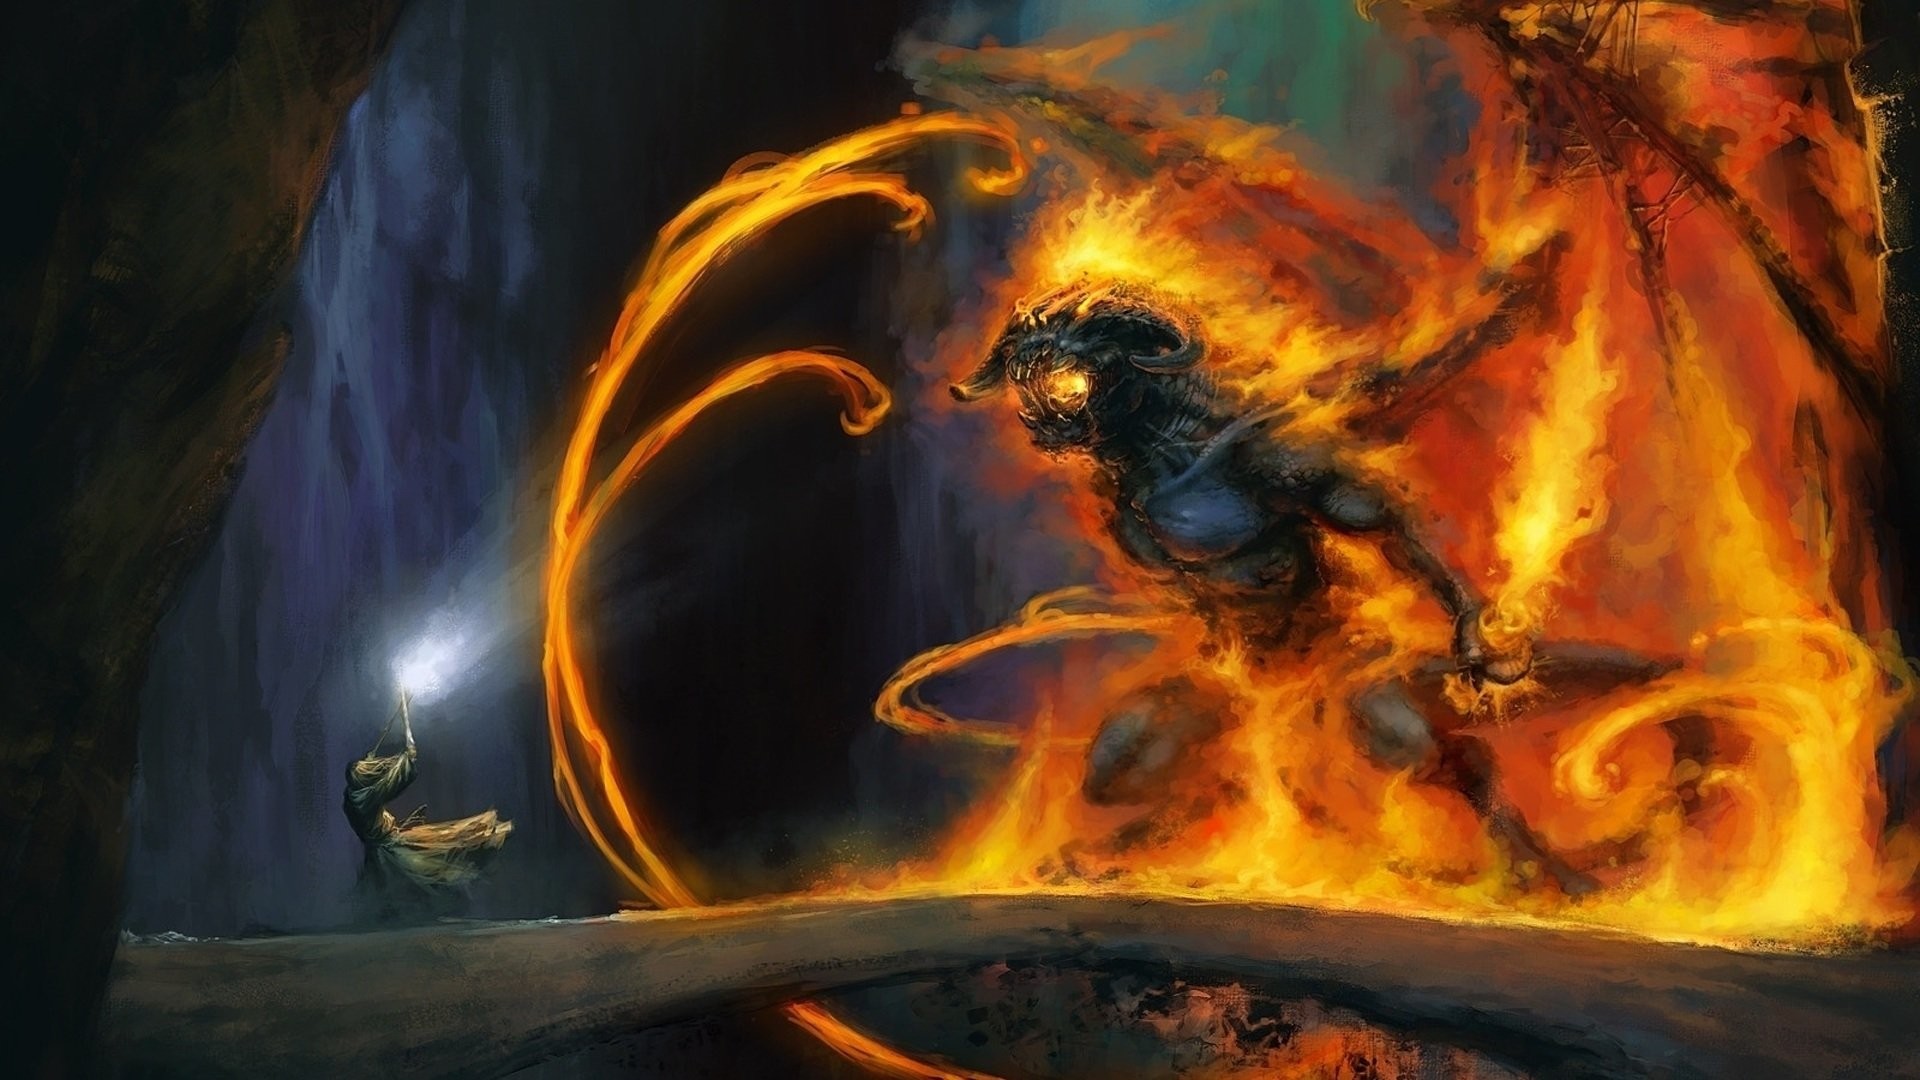 1920x1080 Fantasy - Lord of the Rings Wizard Demon Gandalf Balrog Painting Wallpaper